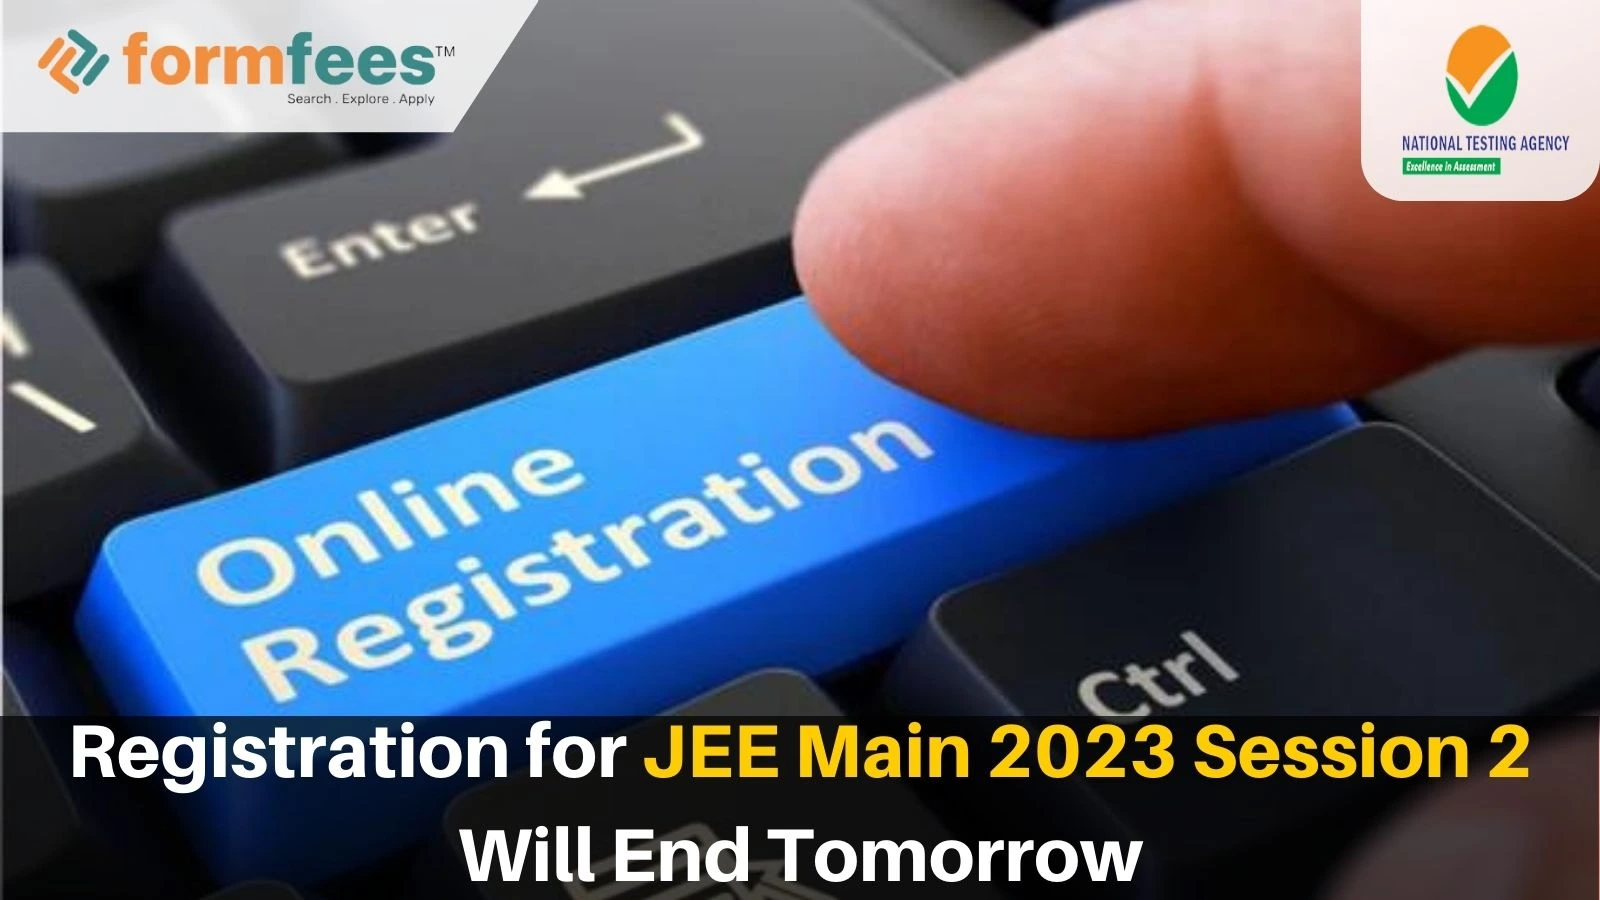 Registration for JEE Main 2023 Session 2 Will End Tomorrow